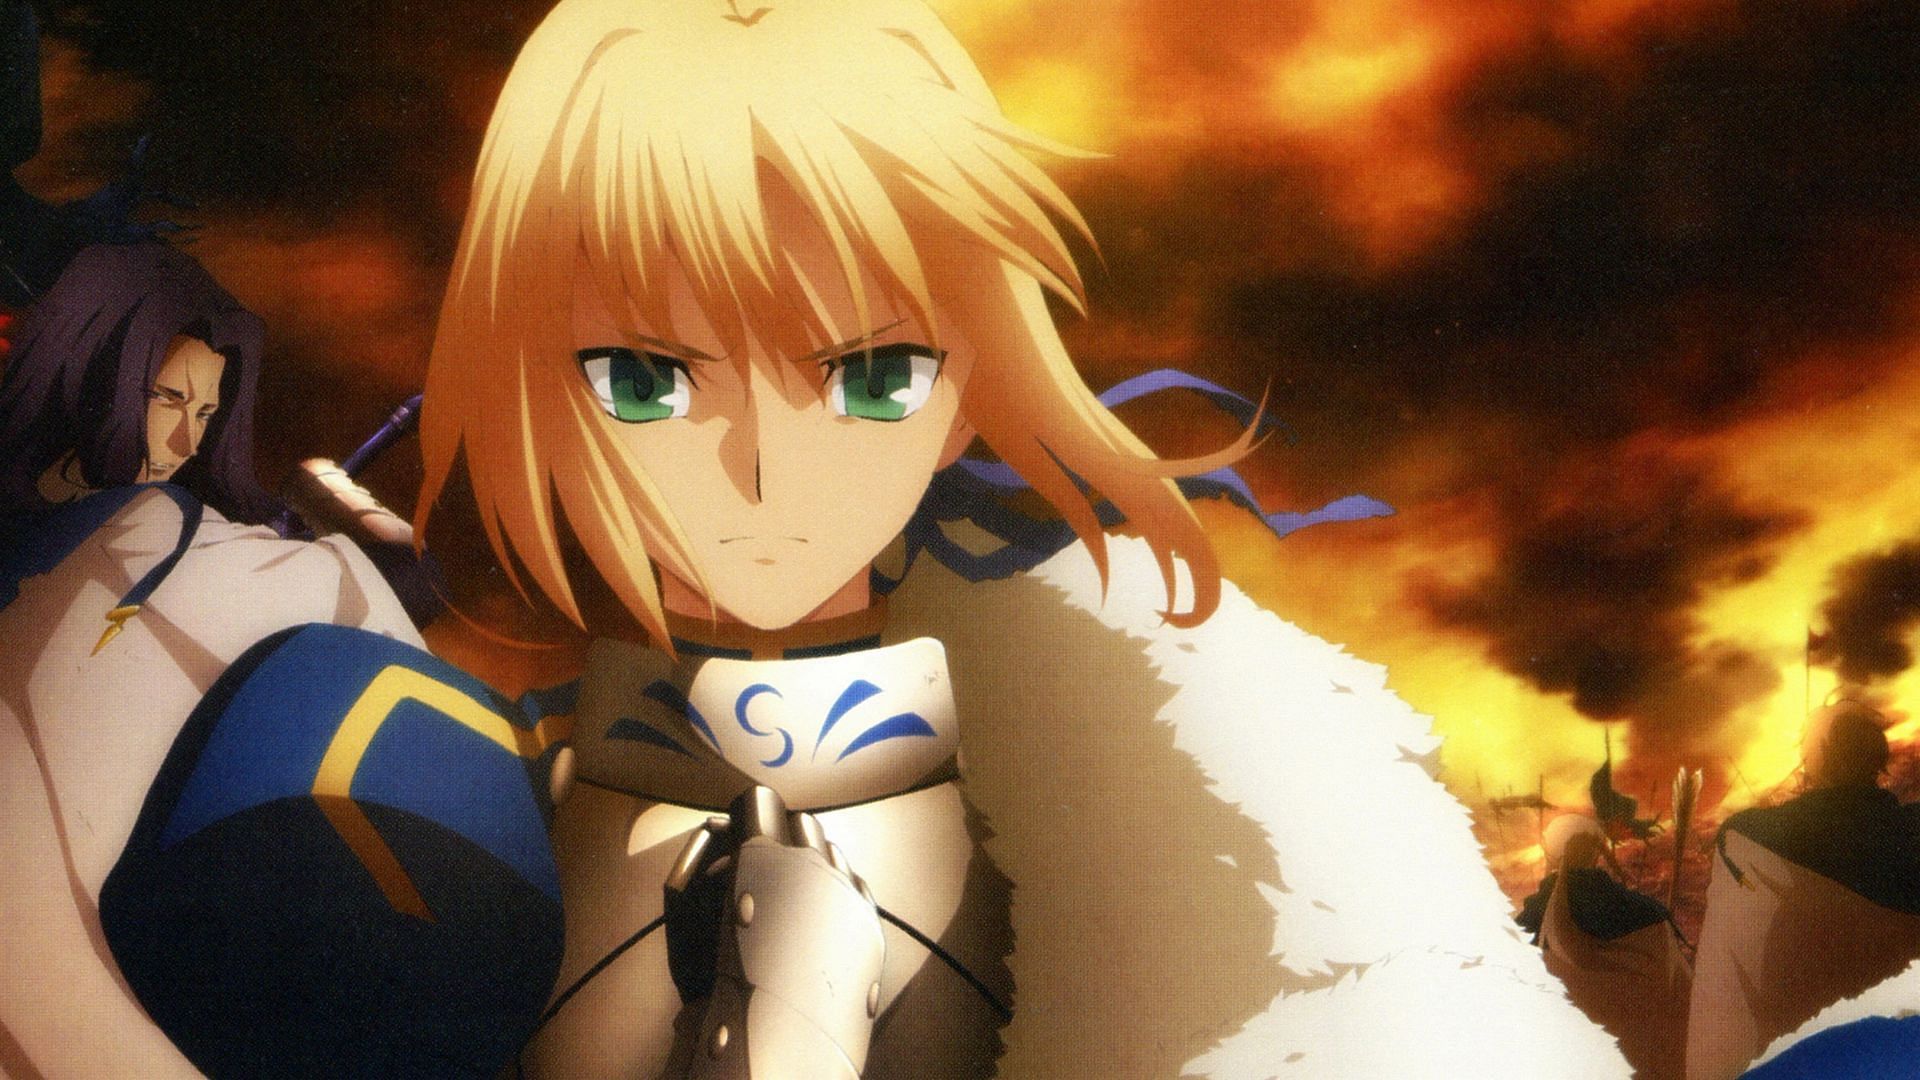 The first of many Saberfaces (Image via Studio Deen)